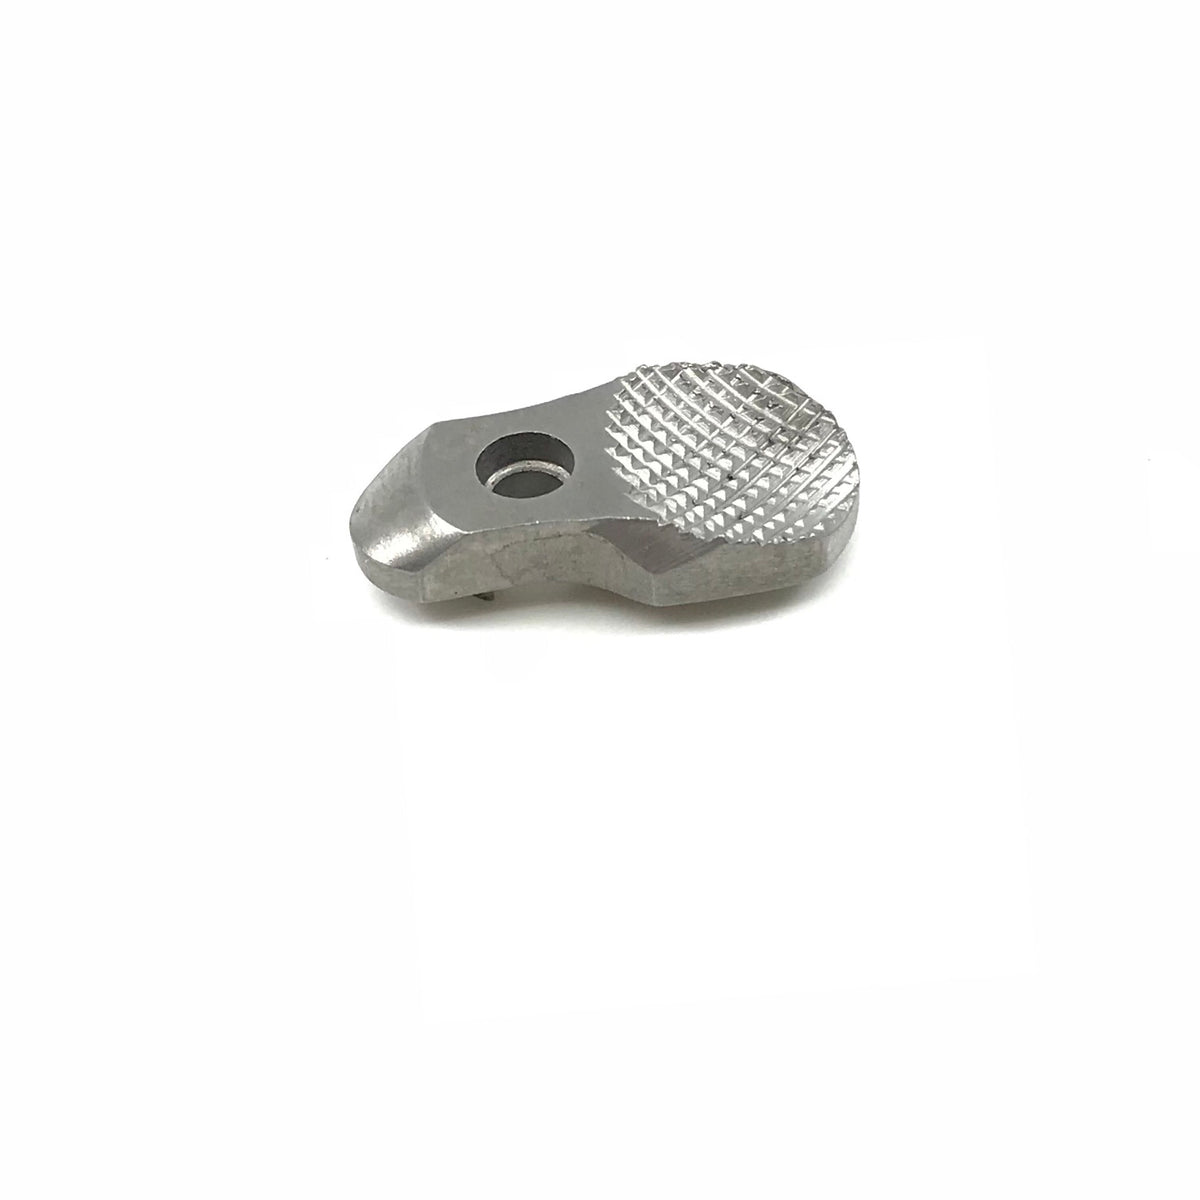 Rossi 500 Stainless Thumbpiece